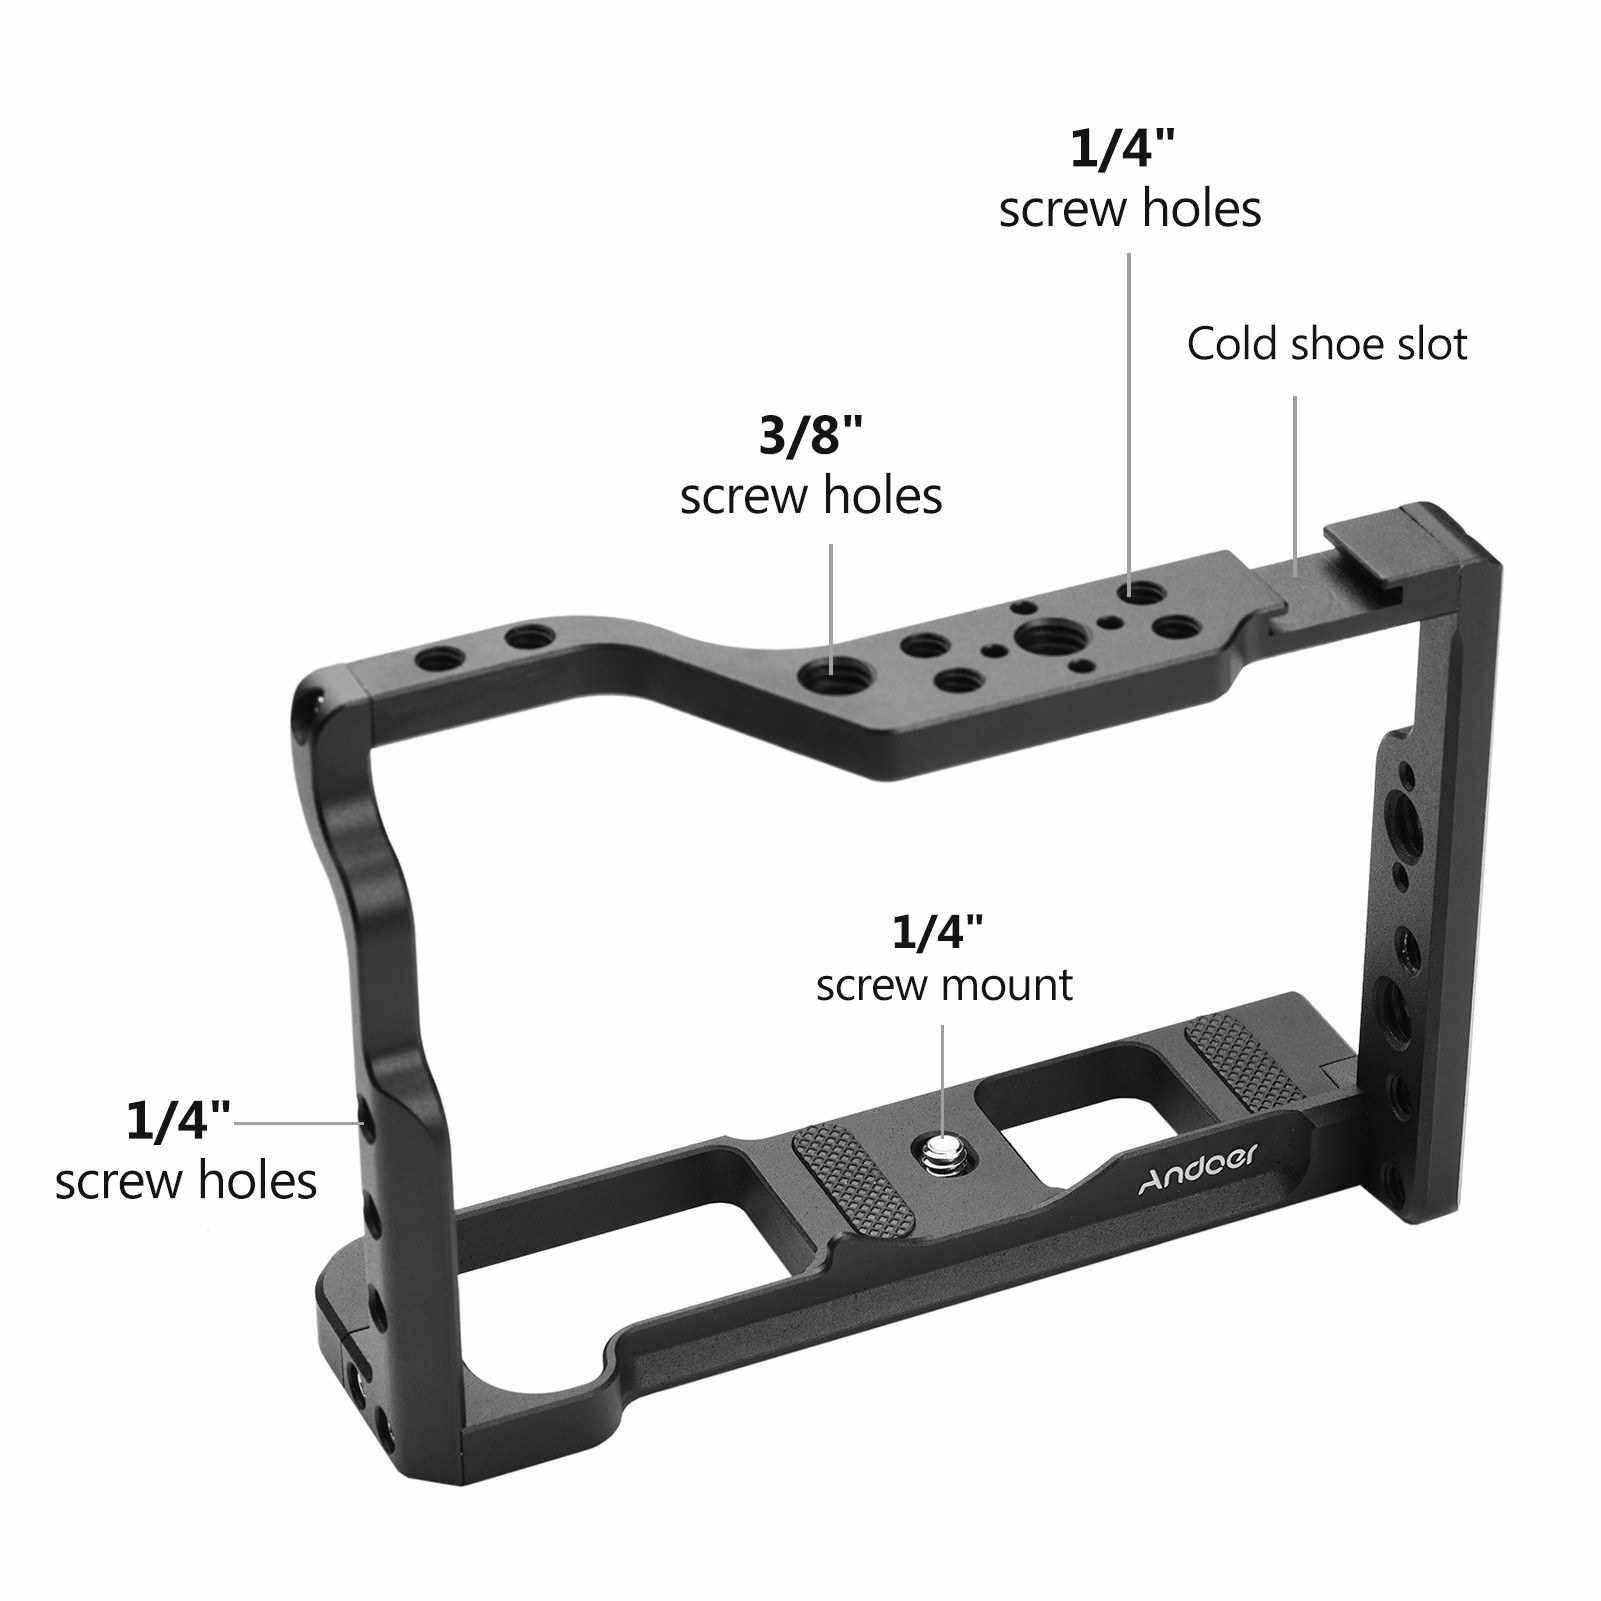 Andoer Aluminum Alloy Camera Cage Protective Vlog Cage Film Making System with Cold Shoe for Microphone Fill Light Compatible with Fujifilm X-T3 X-T2 ILDC Camera (Standard)